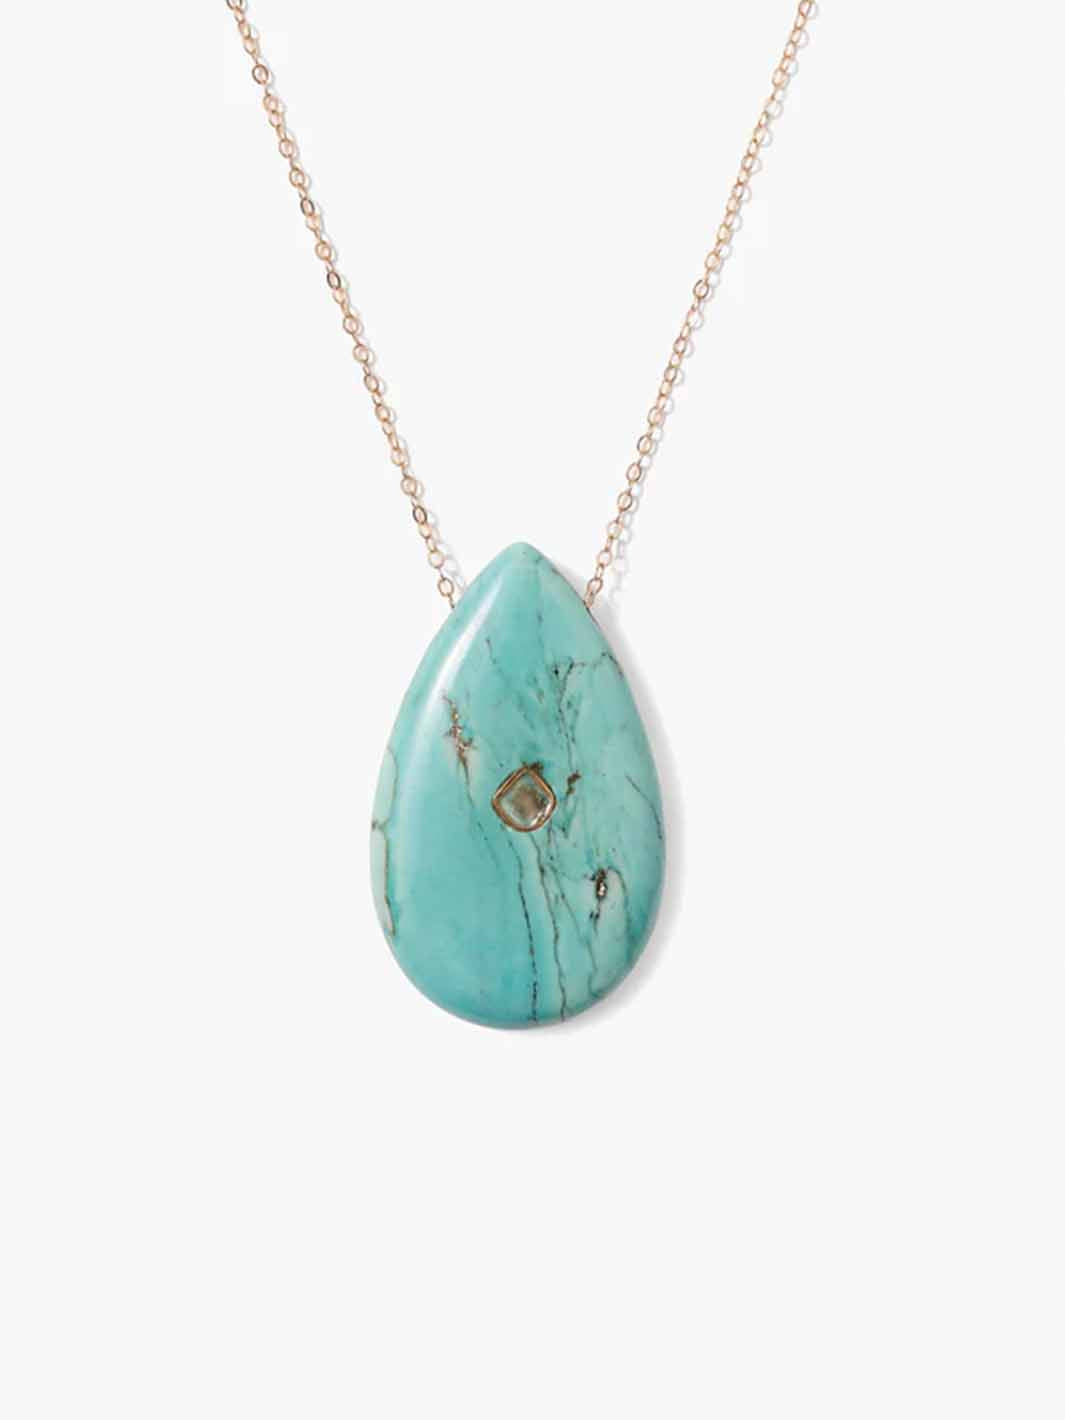 14k Temple Necklace in Turquoise